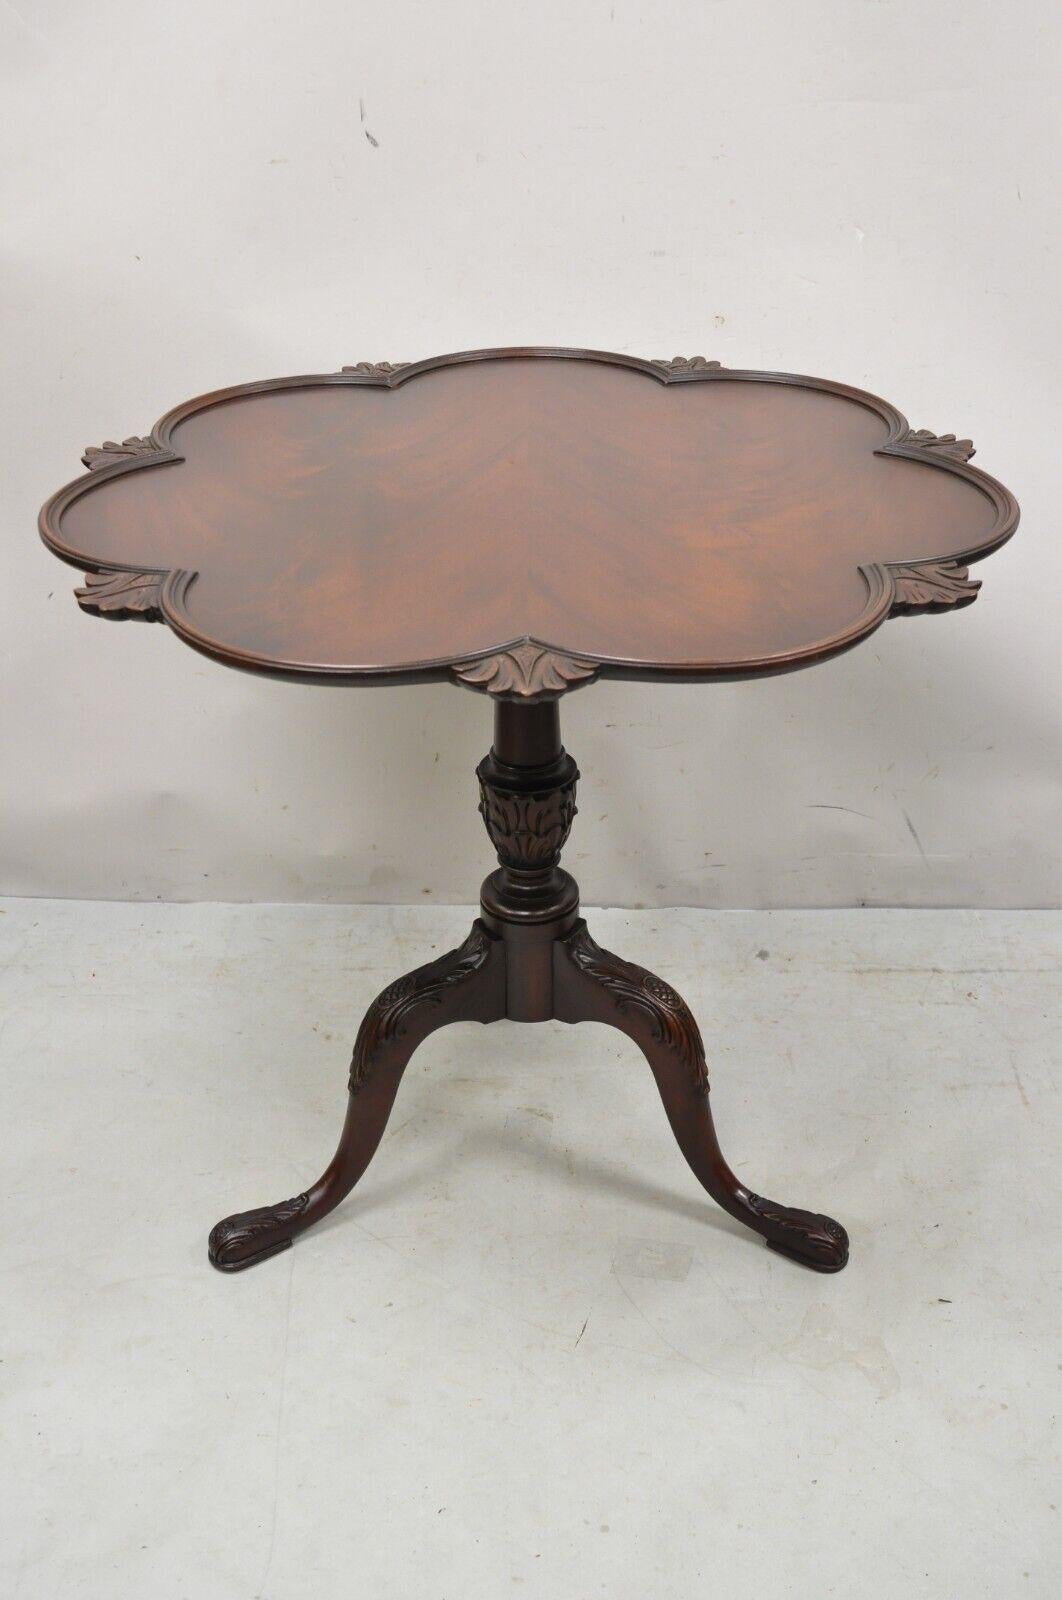 Vintage Crotch Mahogany Chippendale style Pie Crust pedestal side tea table. Item features a carved pedestal base, scalloped top, carved accents, beautiful wood grain, very nice antique item, great style and form. Circa Early to mid 20th century.